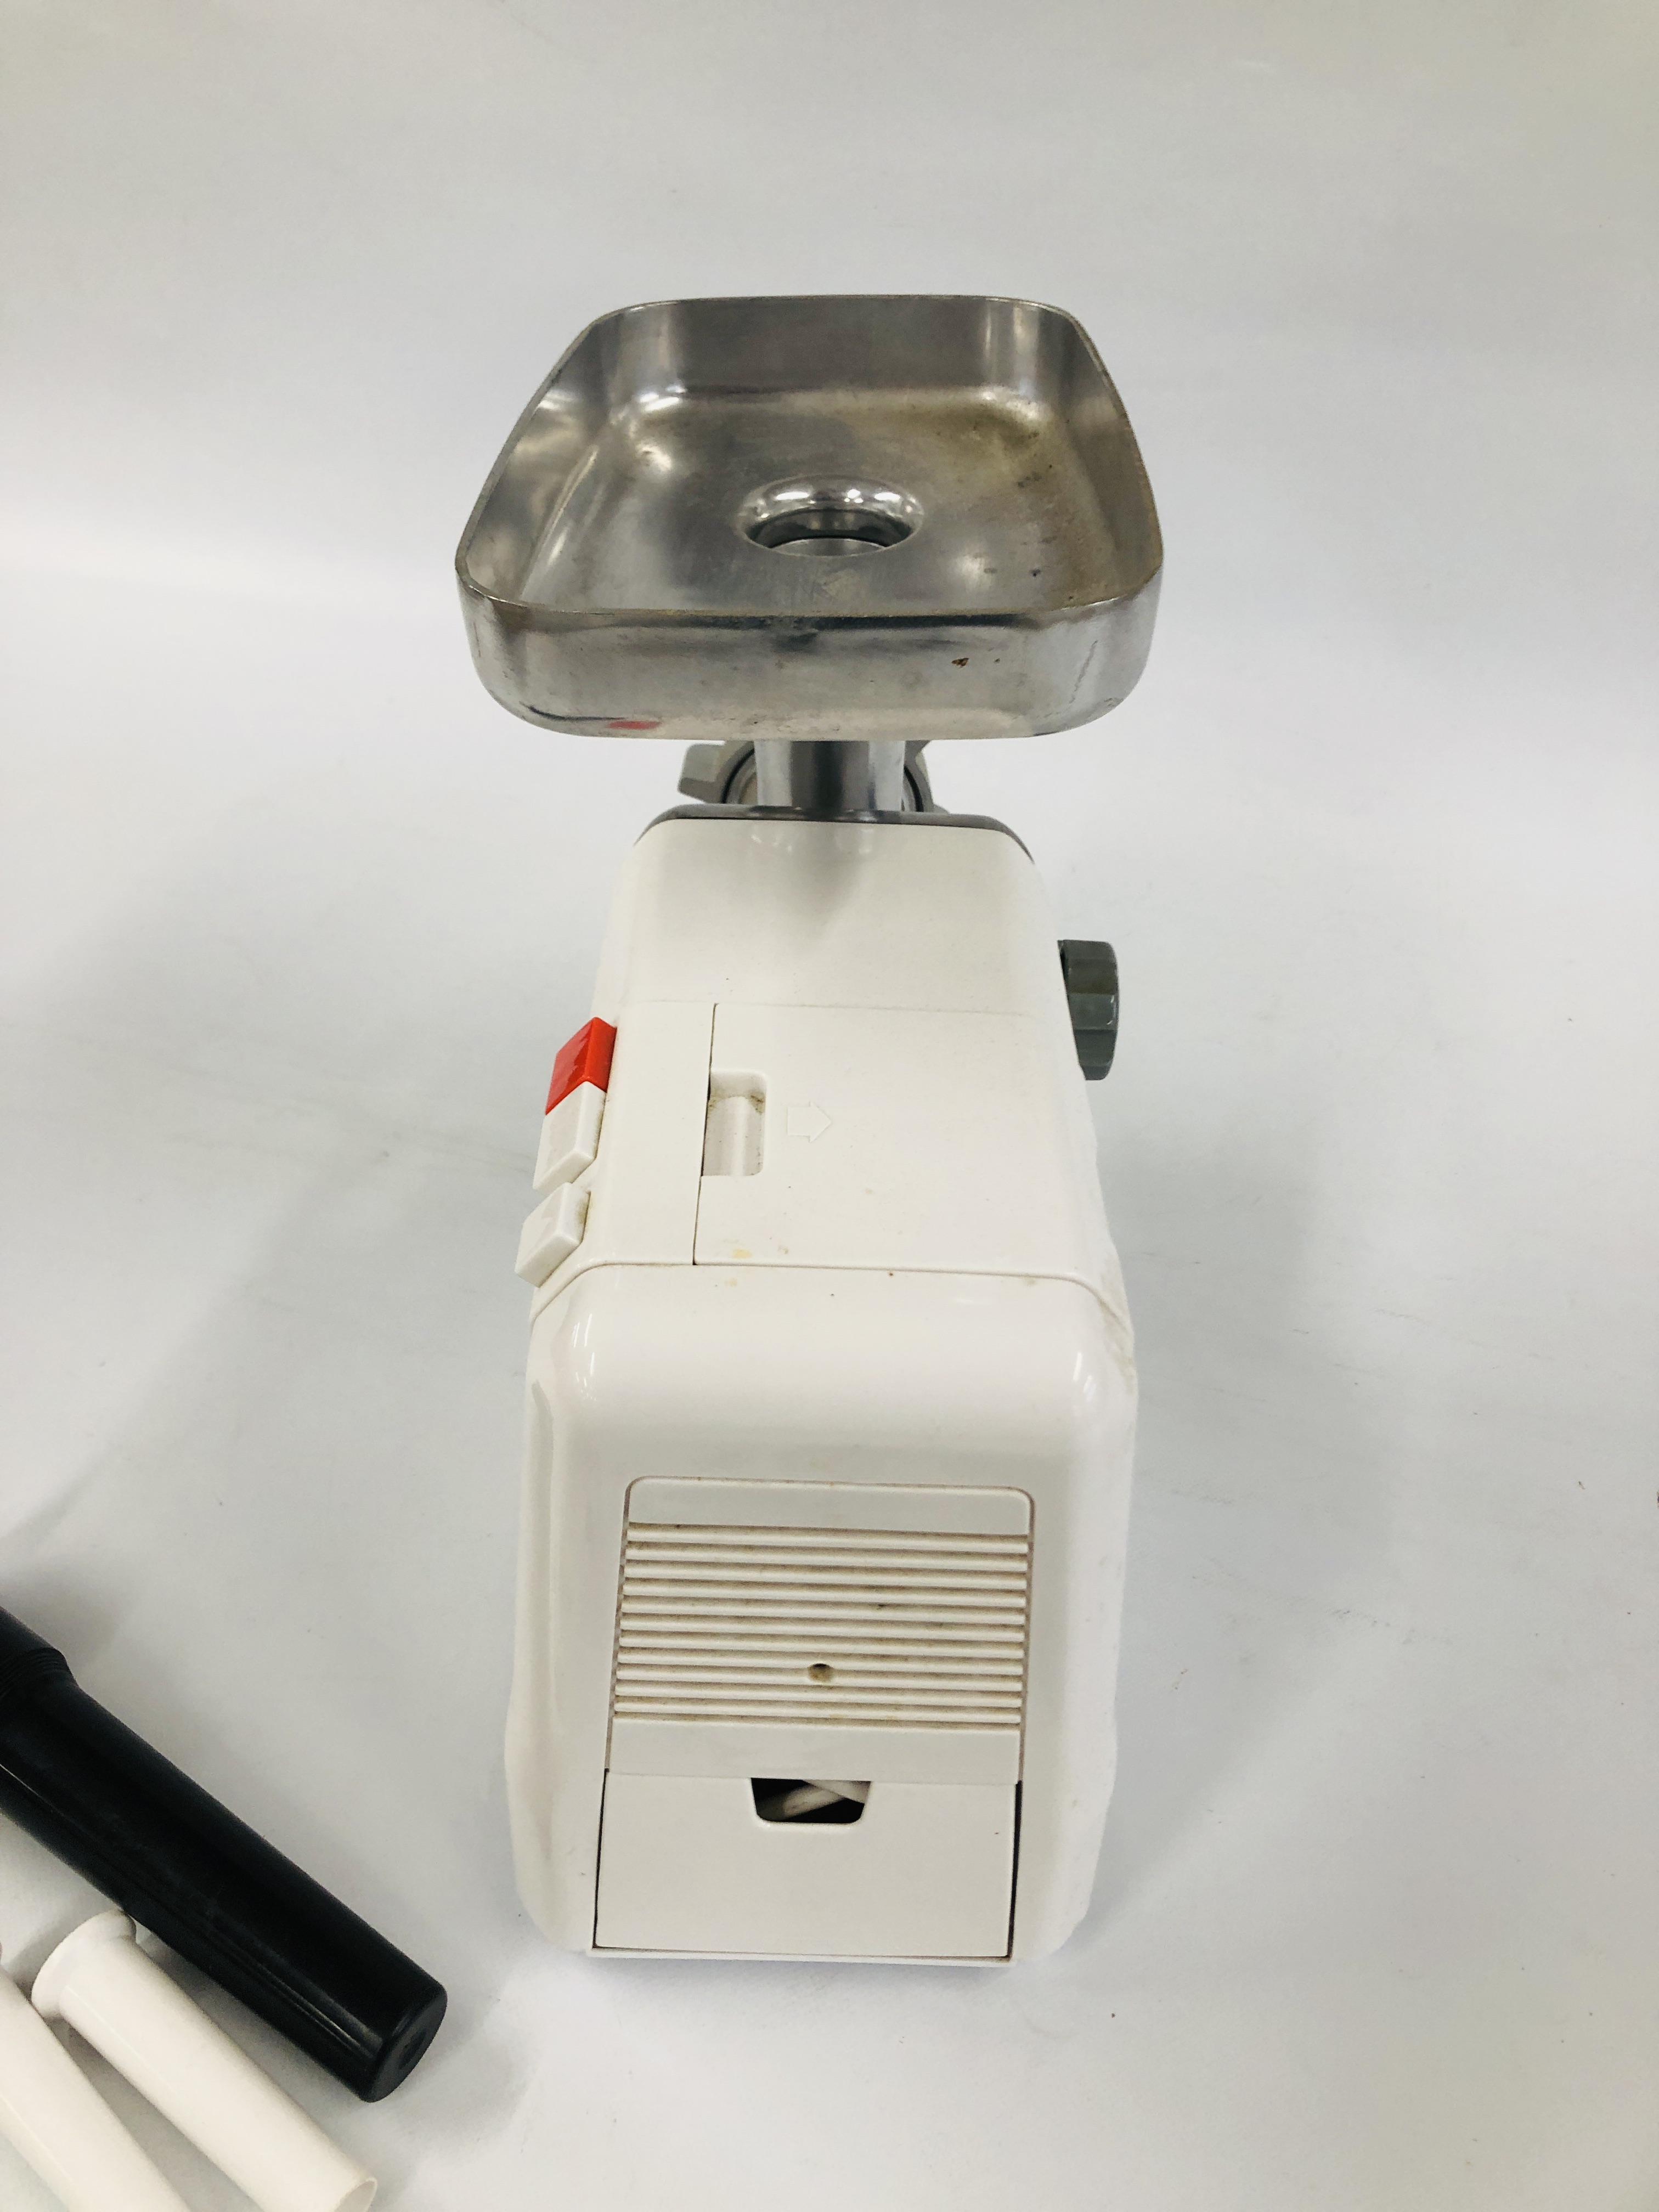 SUPER GRINDER PROFESSIONAL ELECTRIC MINCER WITH ACCESSORIES. - SOLD AS SEEN. - Image 6 of 6